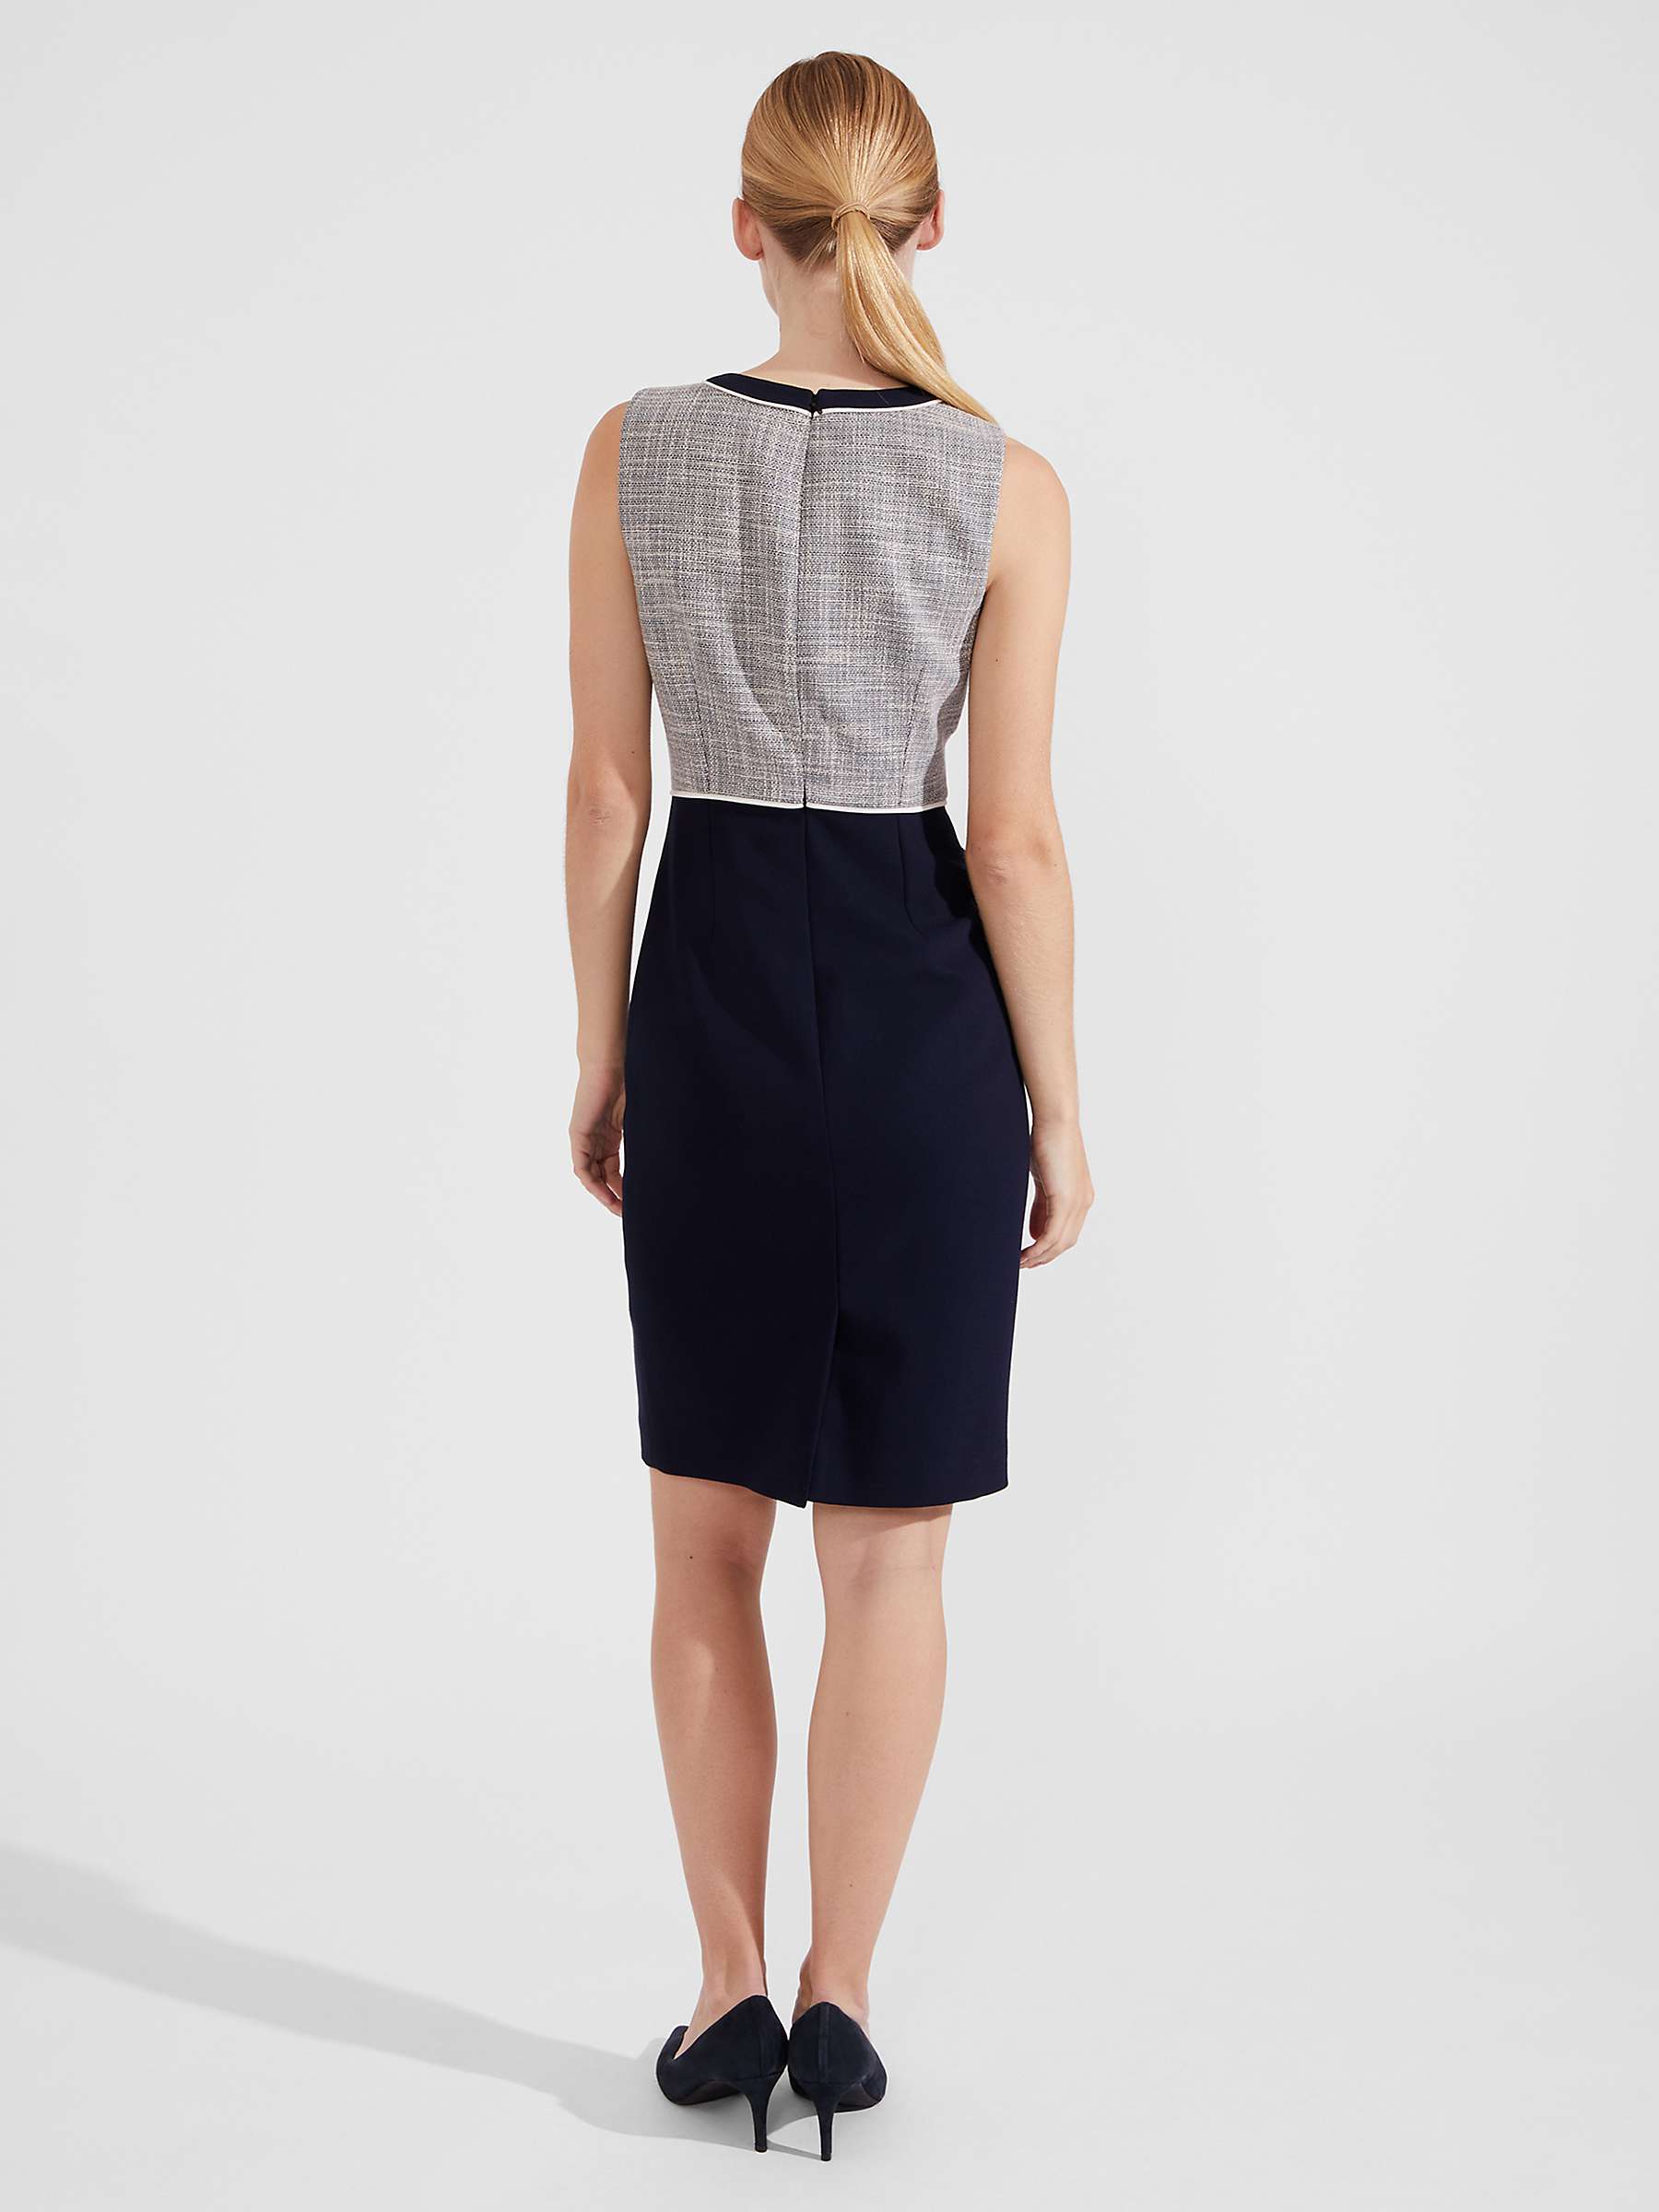 Buy Hobbs Laurie Check Knee Length Dress, Navy/Ivory Online at johnlewis.com